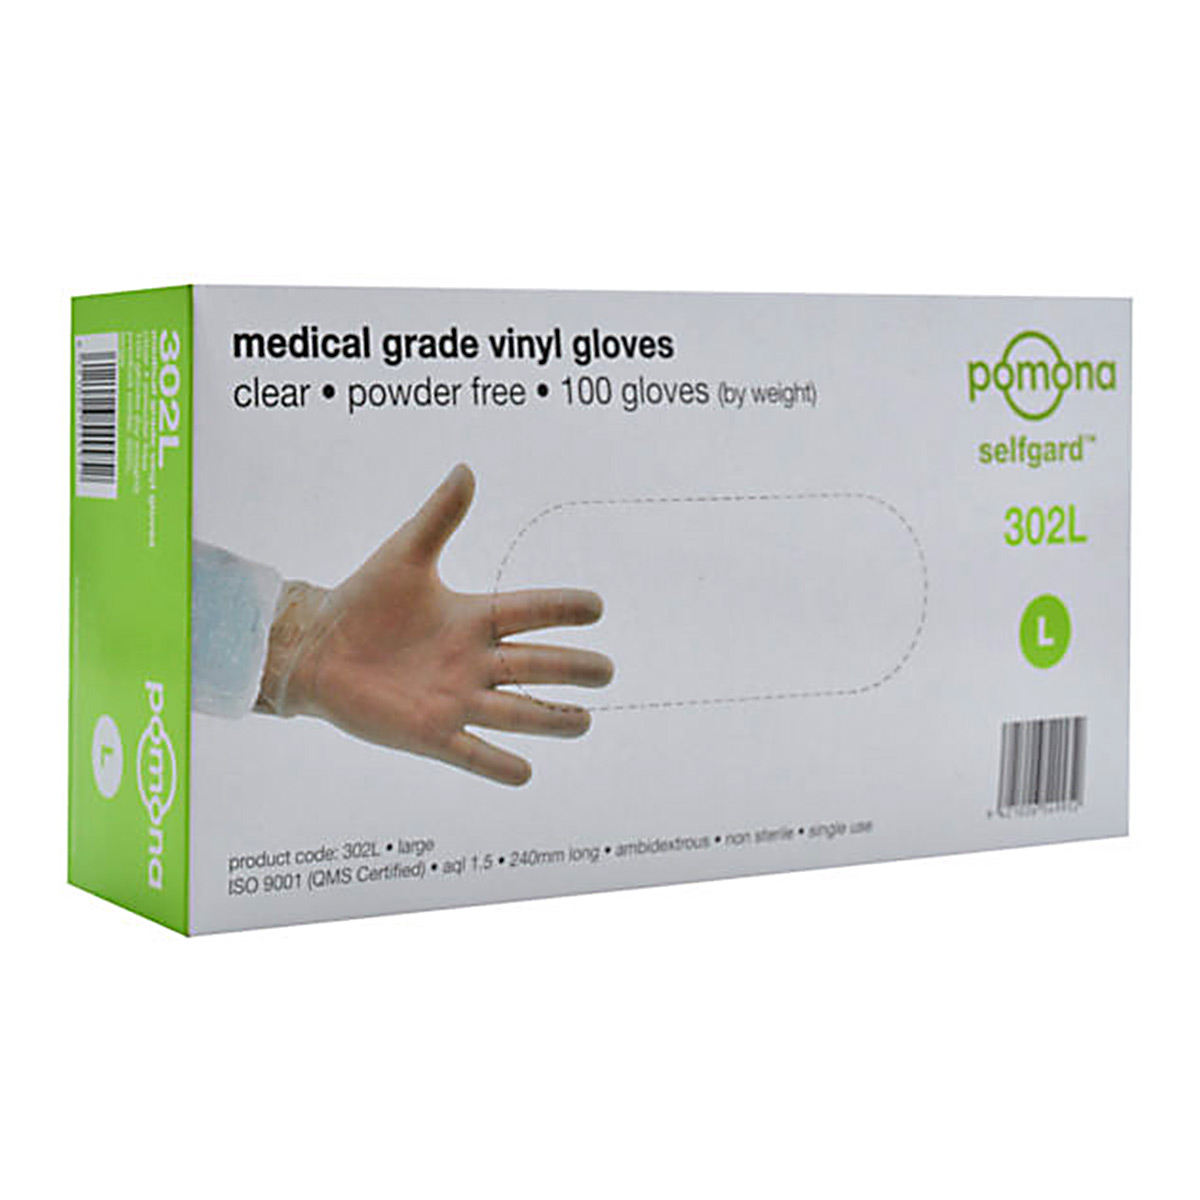 consumables-hospitality-gloves-pomona-vinyl-powderfree-glove-LARGE-100-pack-food-safe-clear-vinyl-economical-durable-comfortable-janitorial-food-production-food-service-industries-vjs-distributors-302L